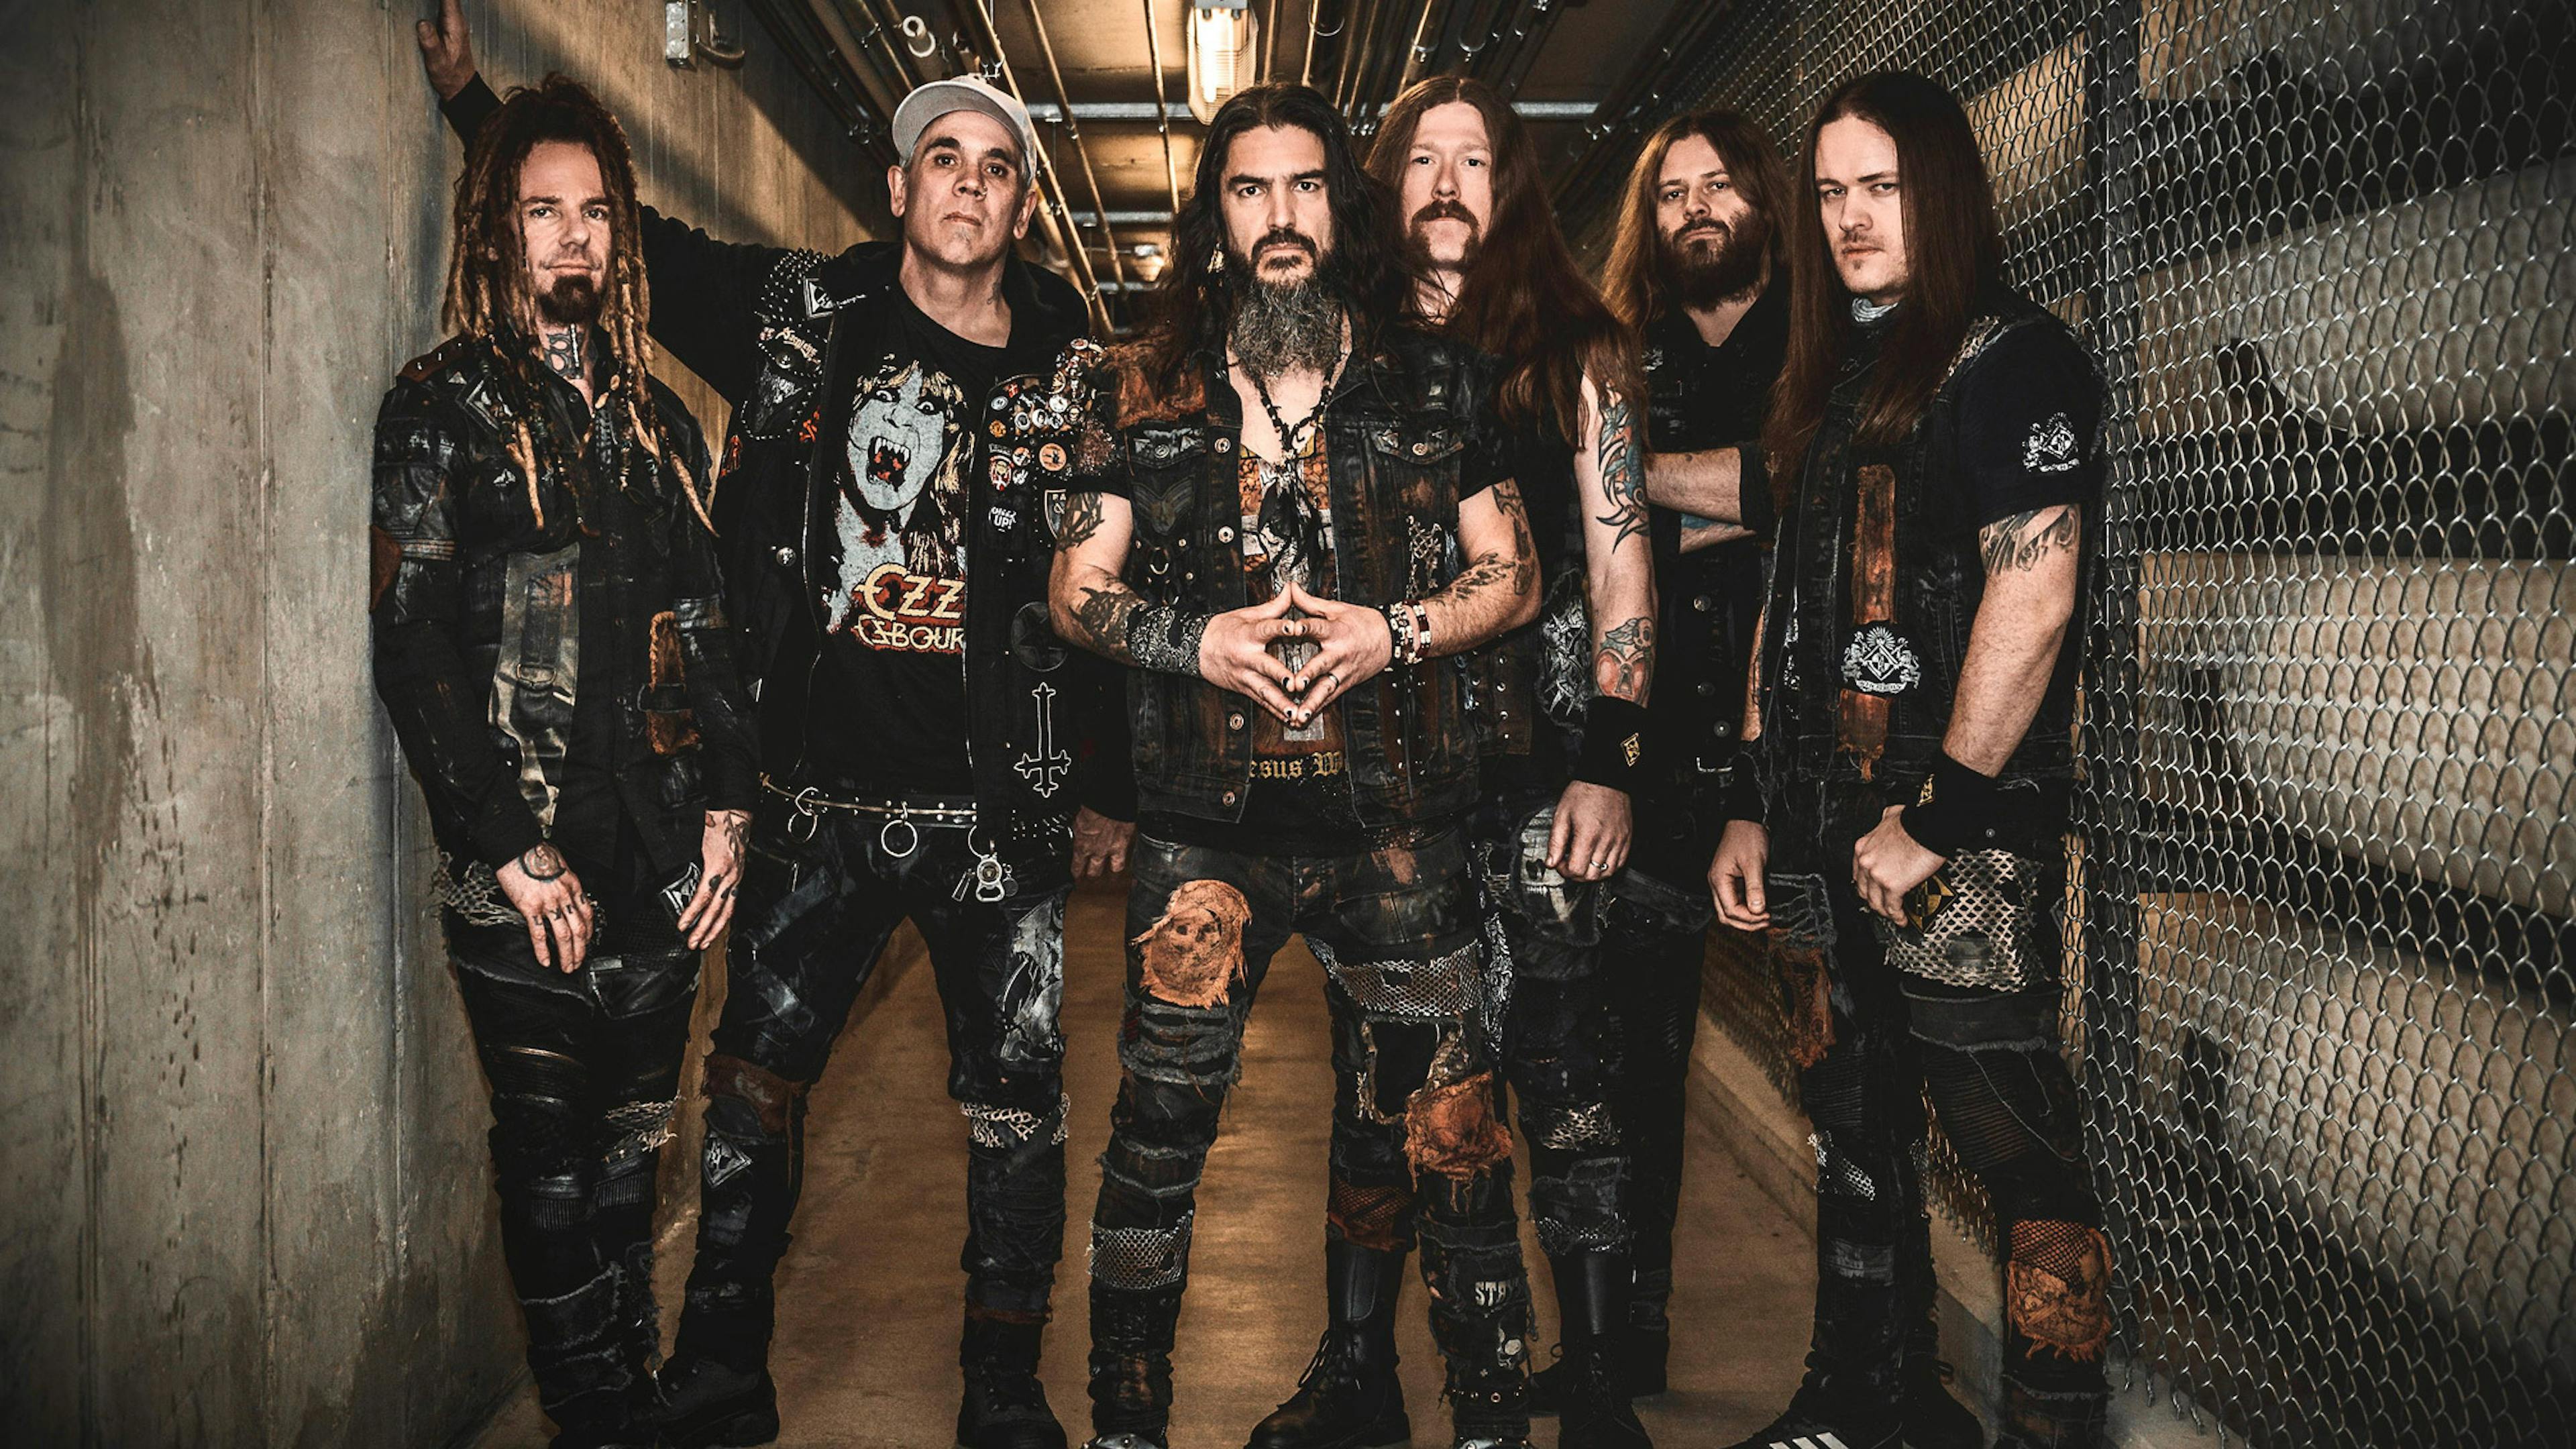 Robb Flynn: "All Machine Head Tour Dates Have Been Pushed Back Indefinitely"